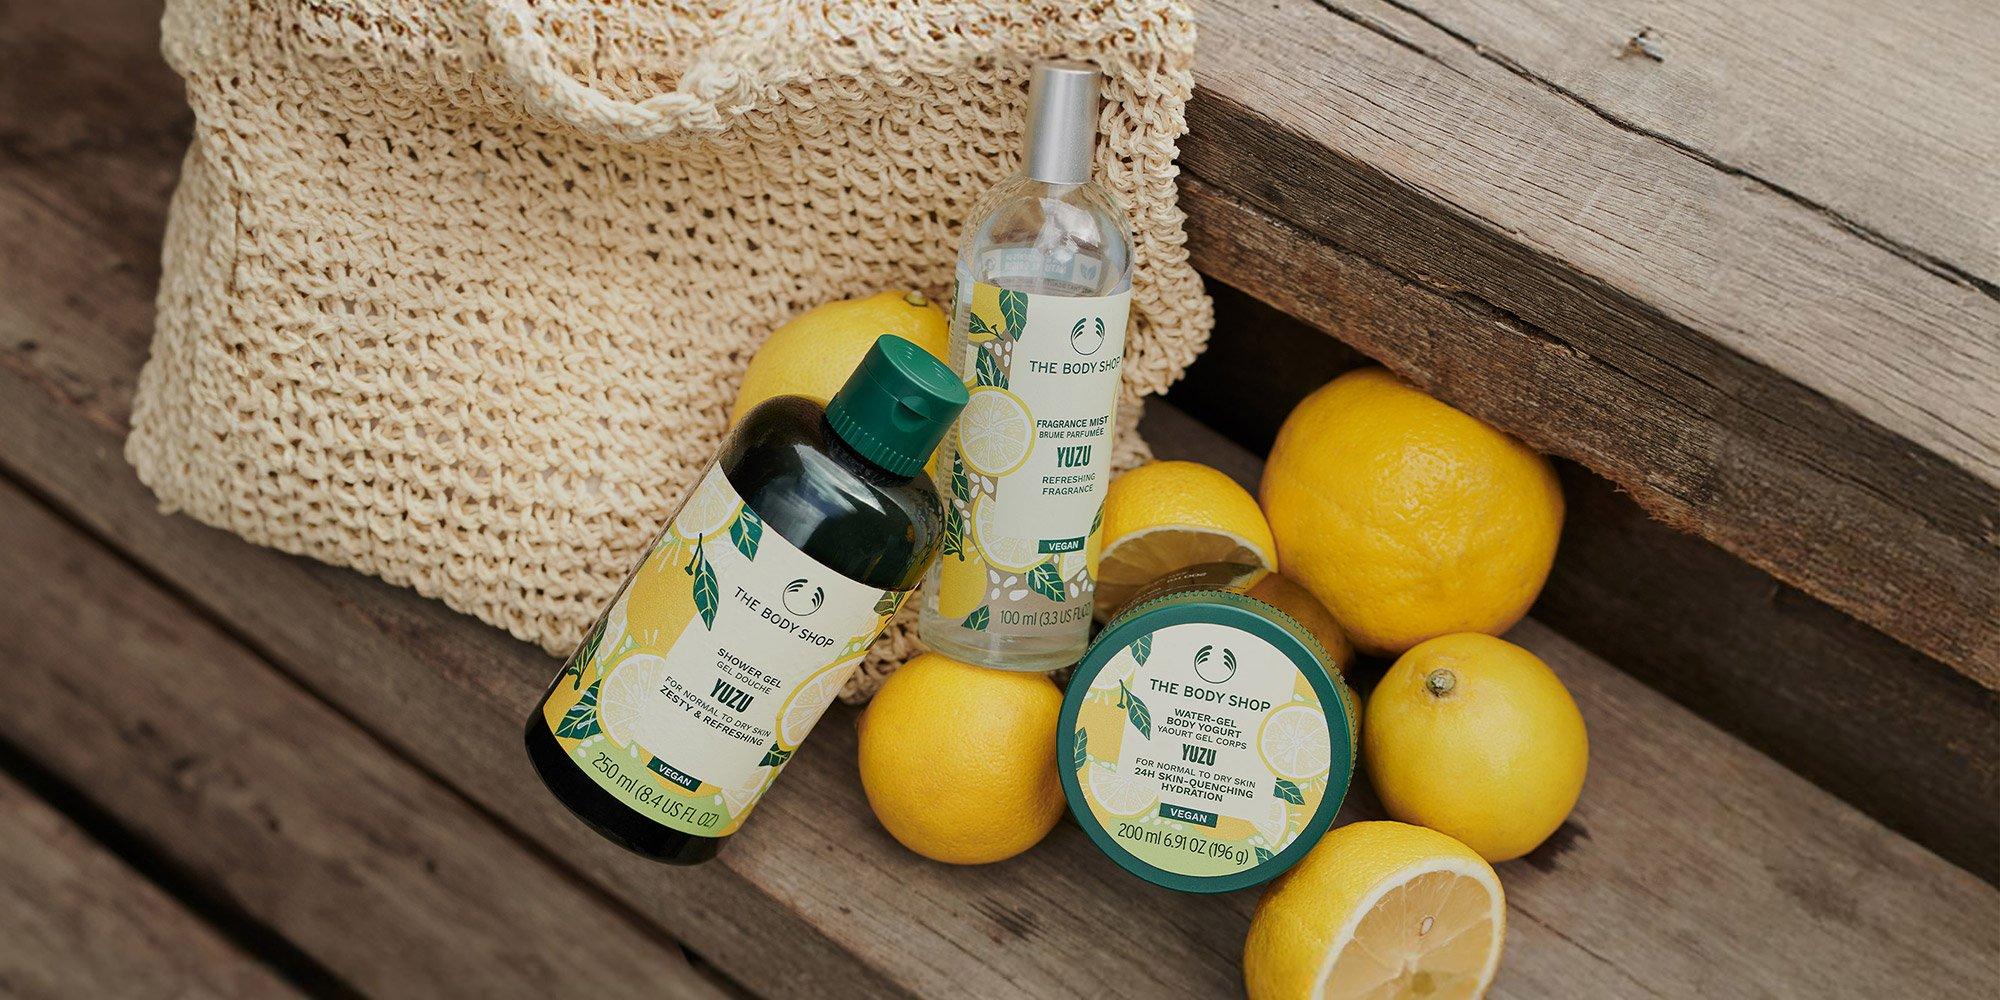 a bag of lemons and body care yuzu products on a wooden bench